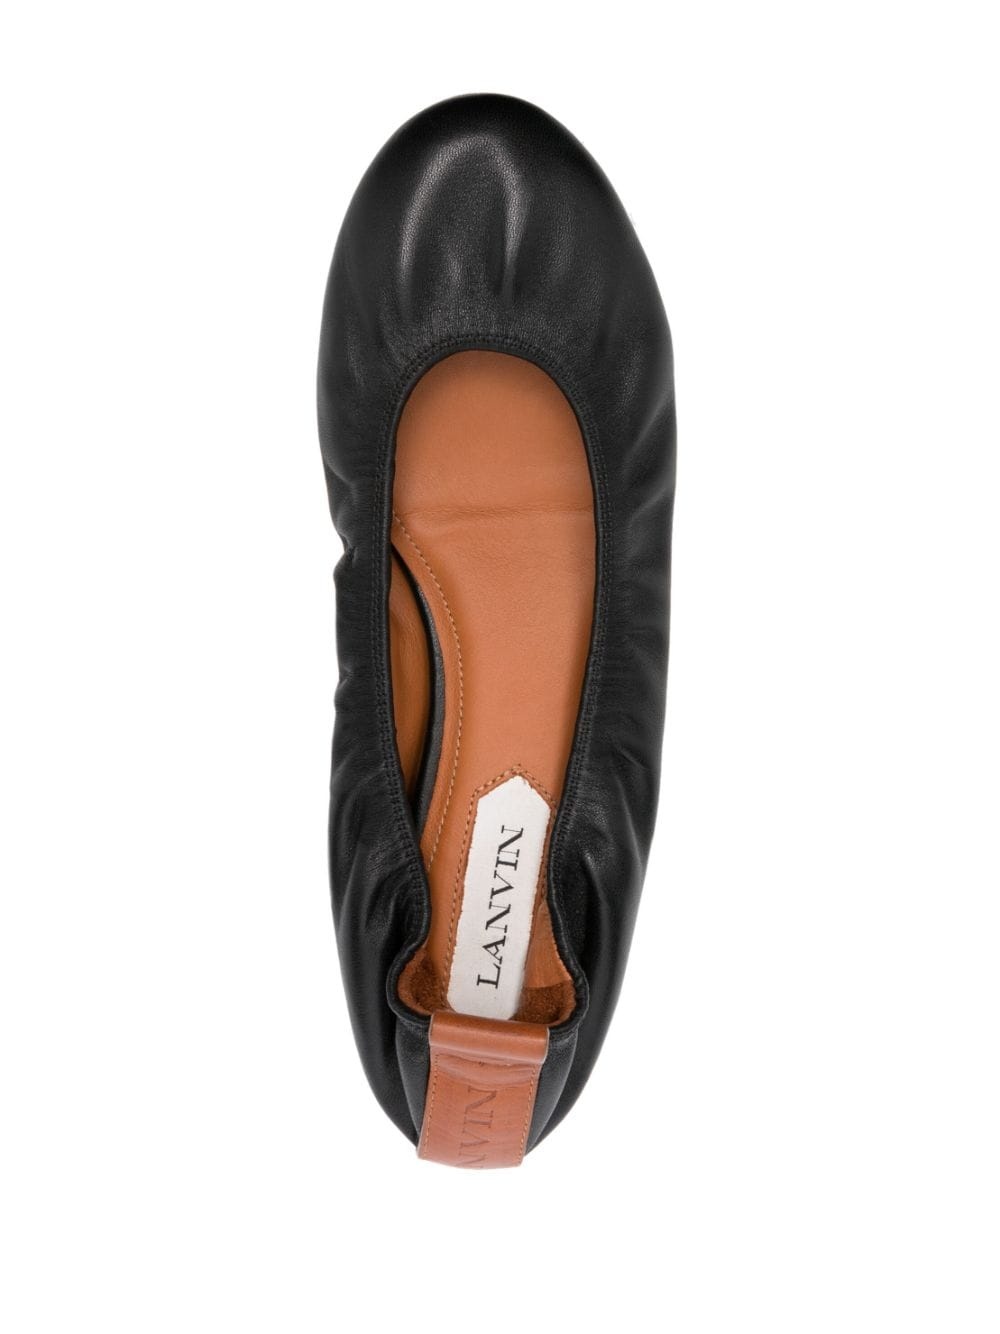 leather ballerina shoes - 4